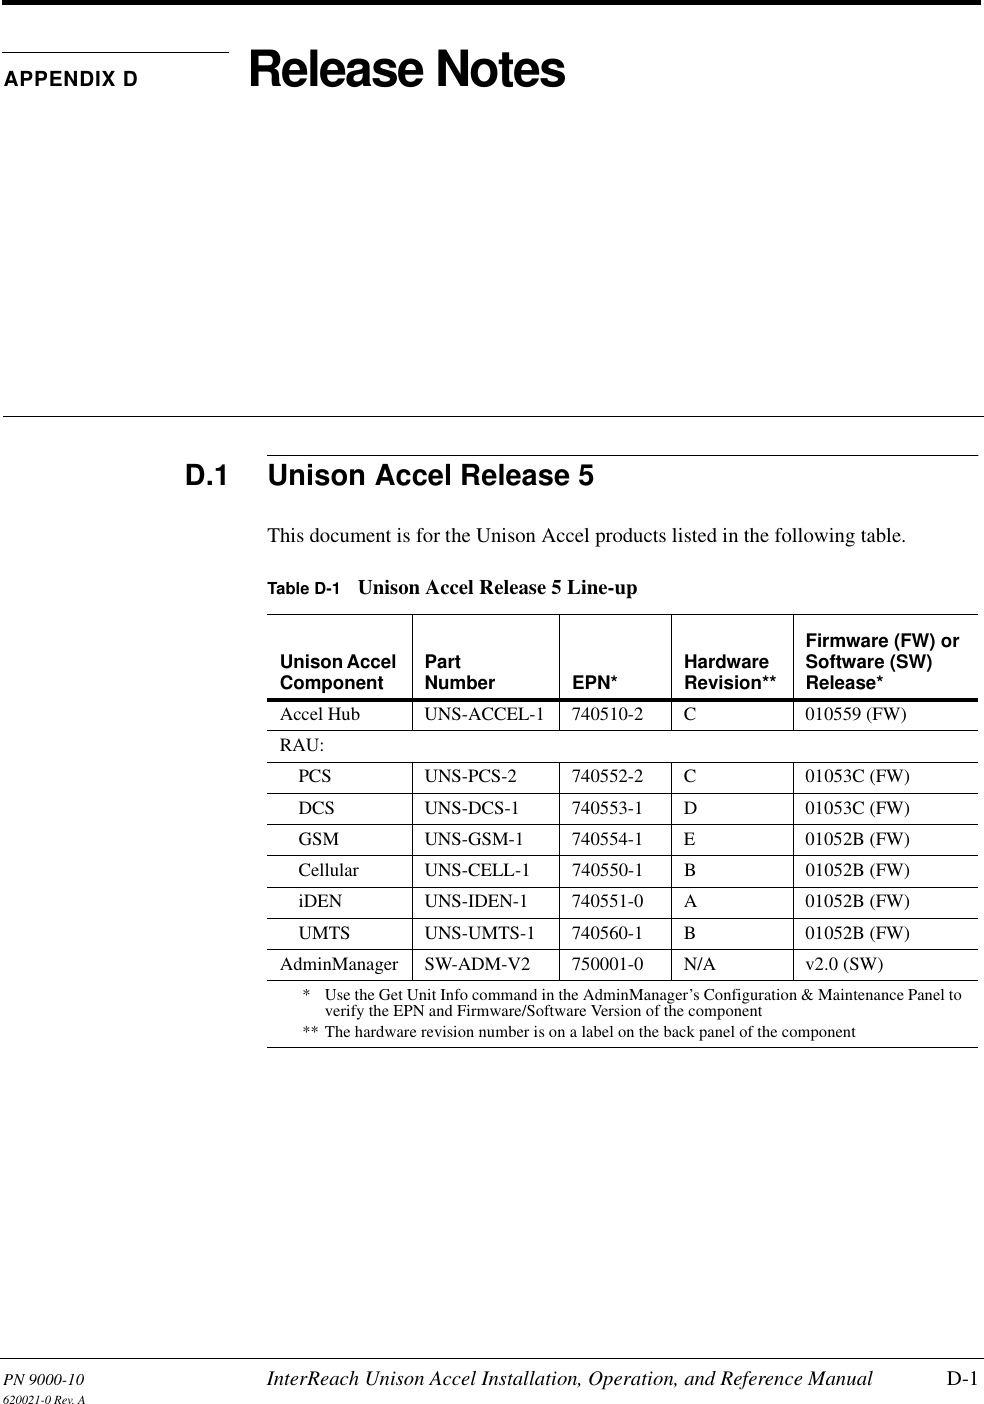 PN 9000-10 InterReach Unison Accel Installation, Operation, and Reference Manual D-1620021-0 Rev. AAPPENDIX D Release NotesD.1 Unison Accel Release 5This document is for the Unison Accel products listed in the following table.Table D-1 Unison Accel Release 5 Line-upUnison Accel Component PartNumber EPN* Hardware Revision**Firmware (FW) or Software (SW) Release*Accel Hub UNS-ACCEL-1 740510-2 C 010559 (FW)RAU:PCS UNS-PCS-2 740552-2 C 01053C (FW)DCS UNS-DCS-1 740553-1 D 01053C (FW)GSM UNS-GSM-1 740554-1 E 01052B (FW)Cellular UNS-CELL-1 740550-1 B 01052B (FW)iDEN UNS-IDEN-1 740551-0 A 01052B (FW)UMTS UNS-UMTS-1 740560-1 B 01052B (FW)AdminManager SW-ADM-V2 750001-0 N/A v2.0 (SW)*  Use the Get Unit Info command in the AdminManager’s Configuration &amp; Maintenance Panel to verify the EPN and Firmware/Software Version of the component** The hardware revision number is on a label on the back panel of the component